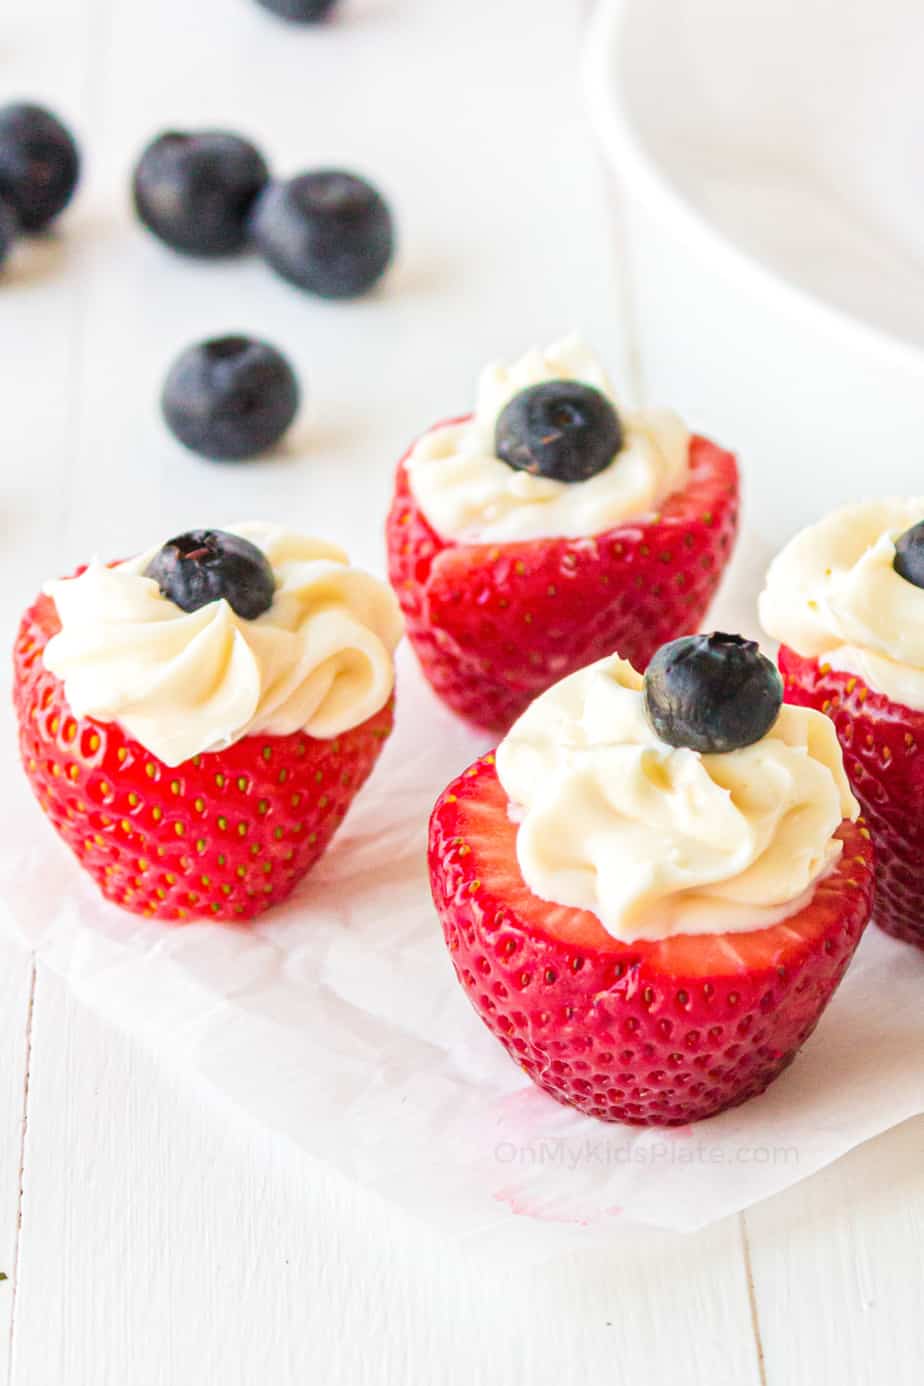 Side view of three strawberries filled with cheesecake and topped with a blueberry